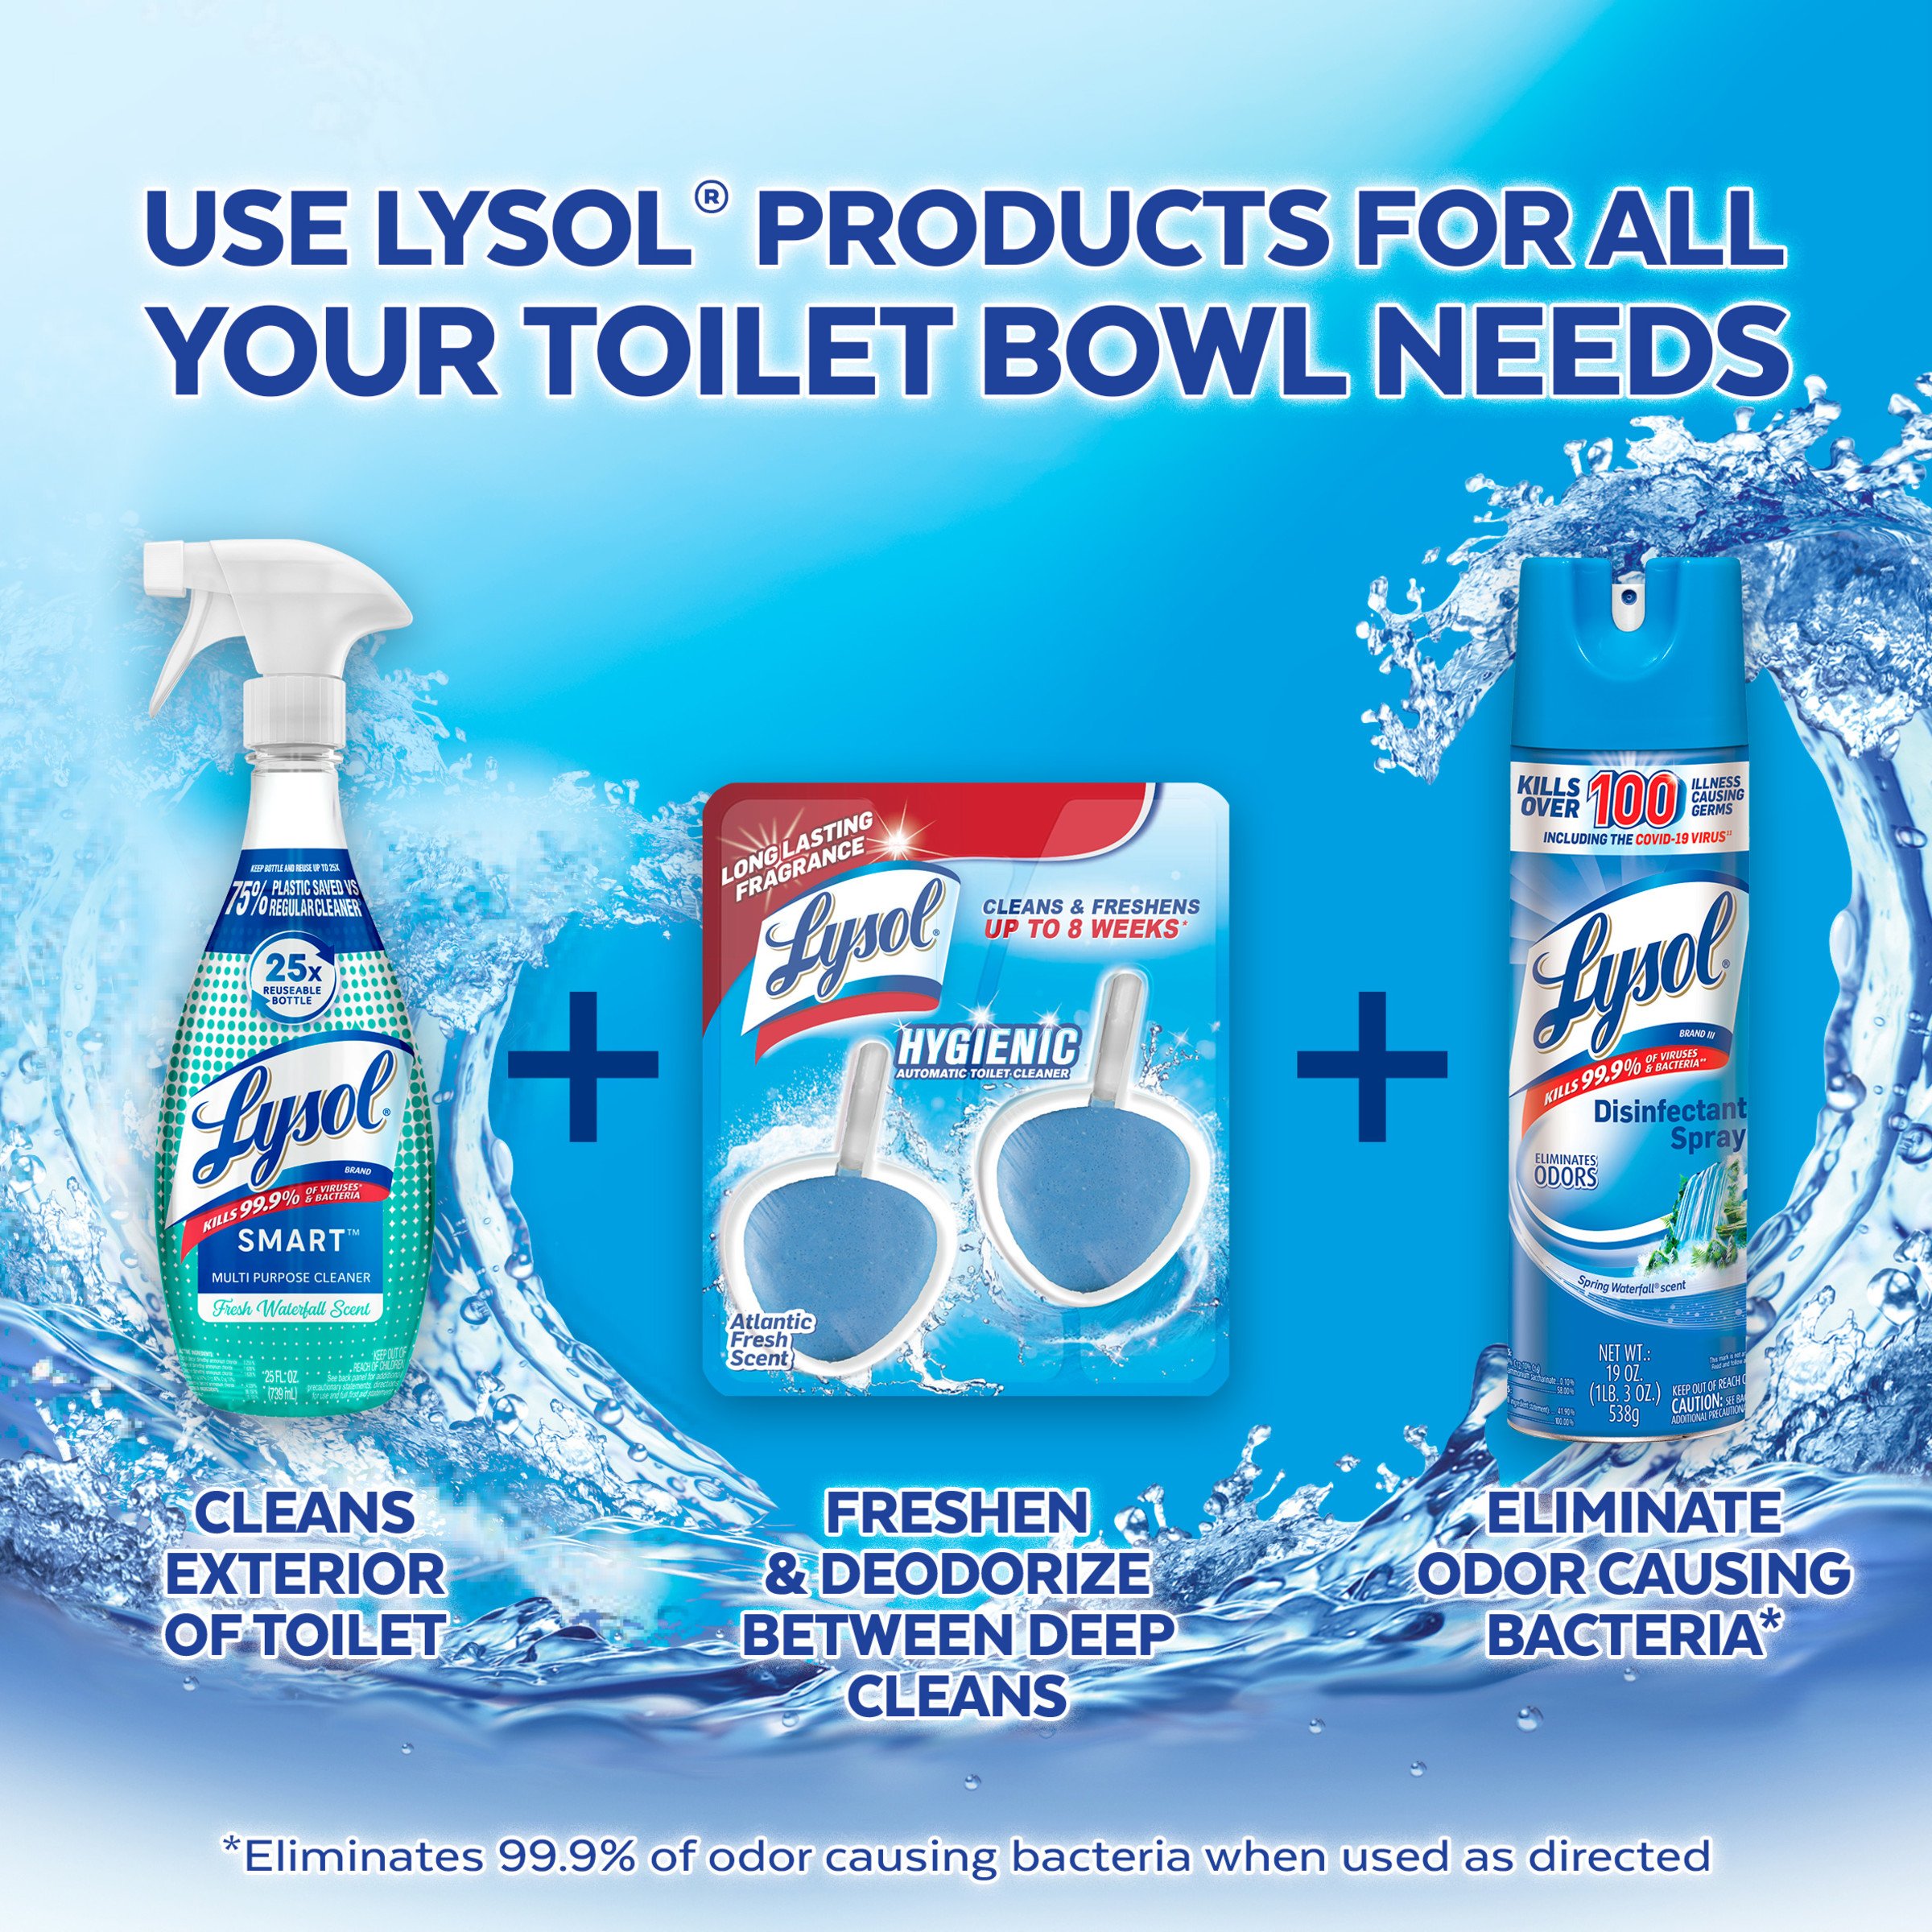 Rid-X Septic System Treatment - Shop Toilet Bowl Cleaners at H-E-B